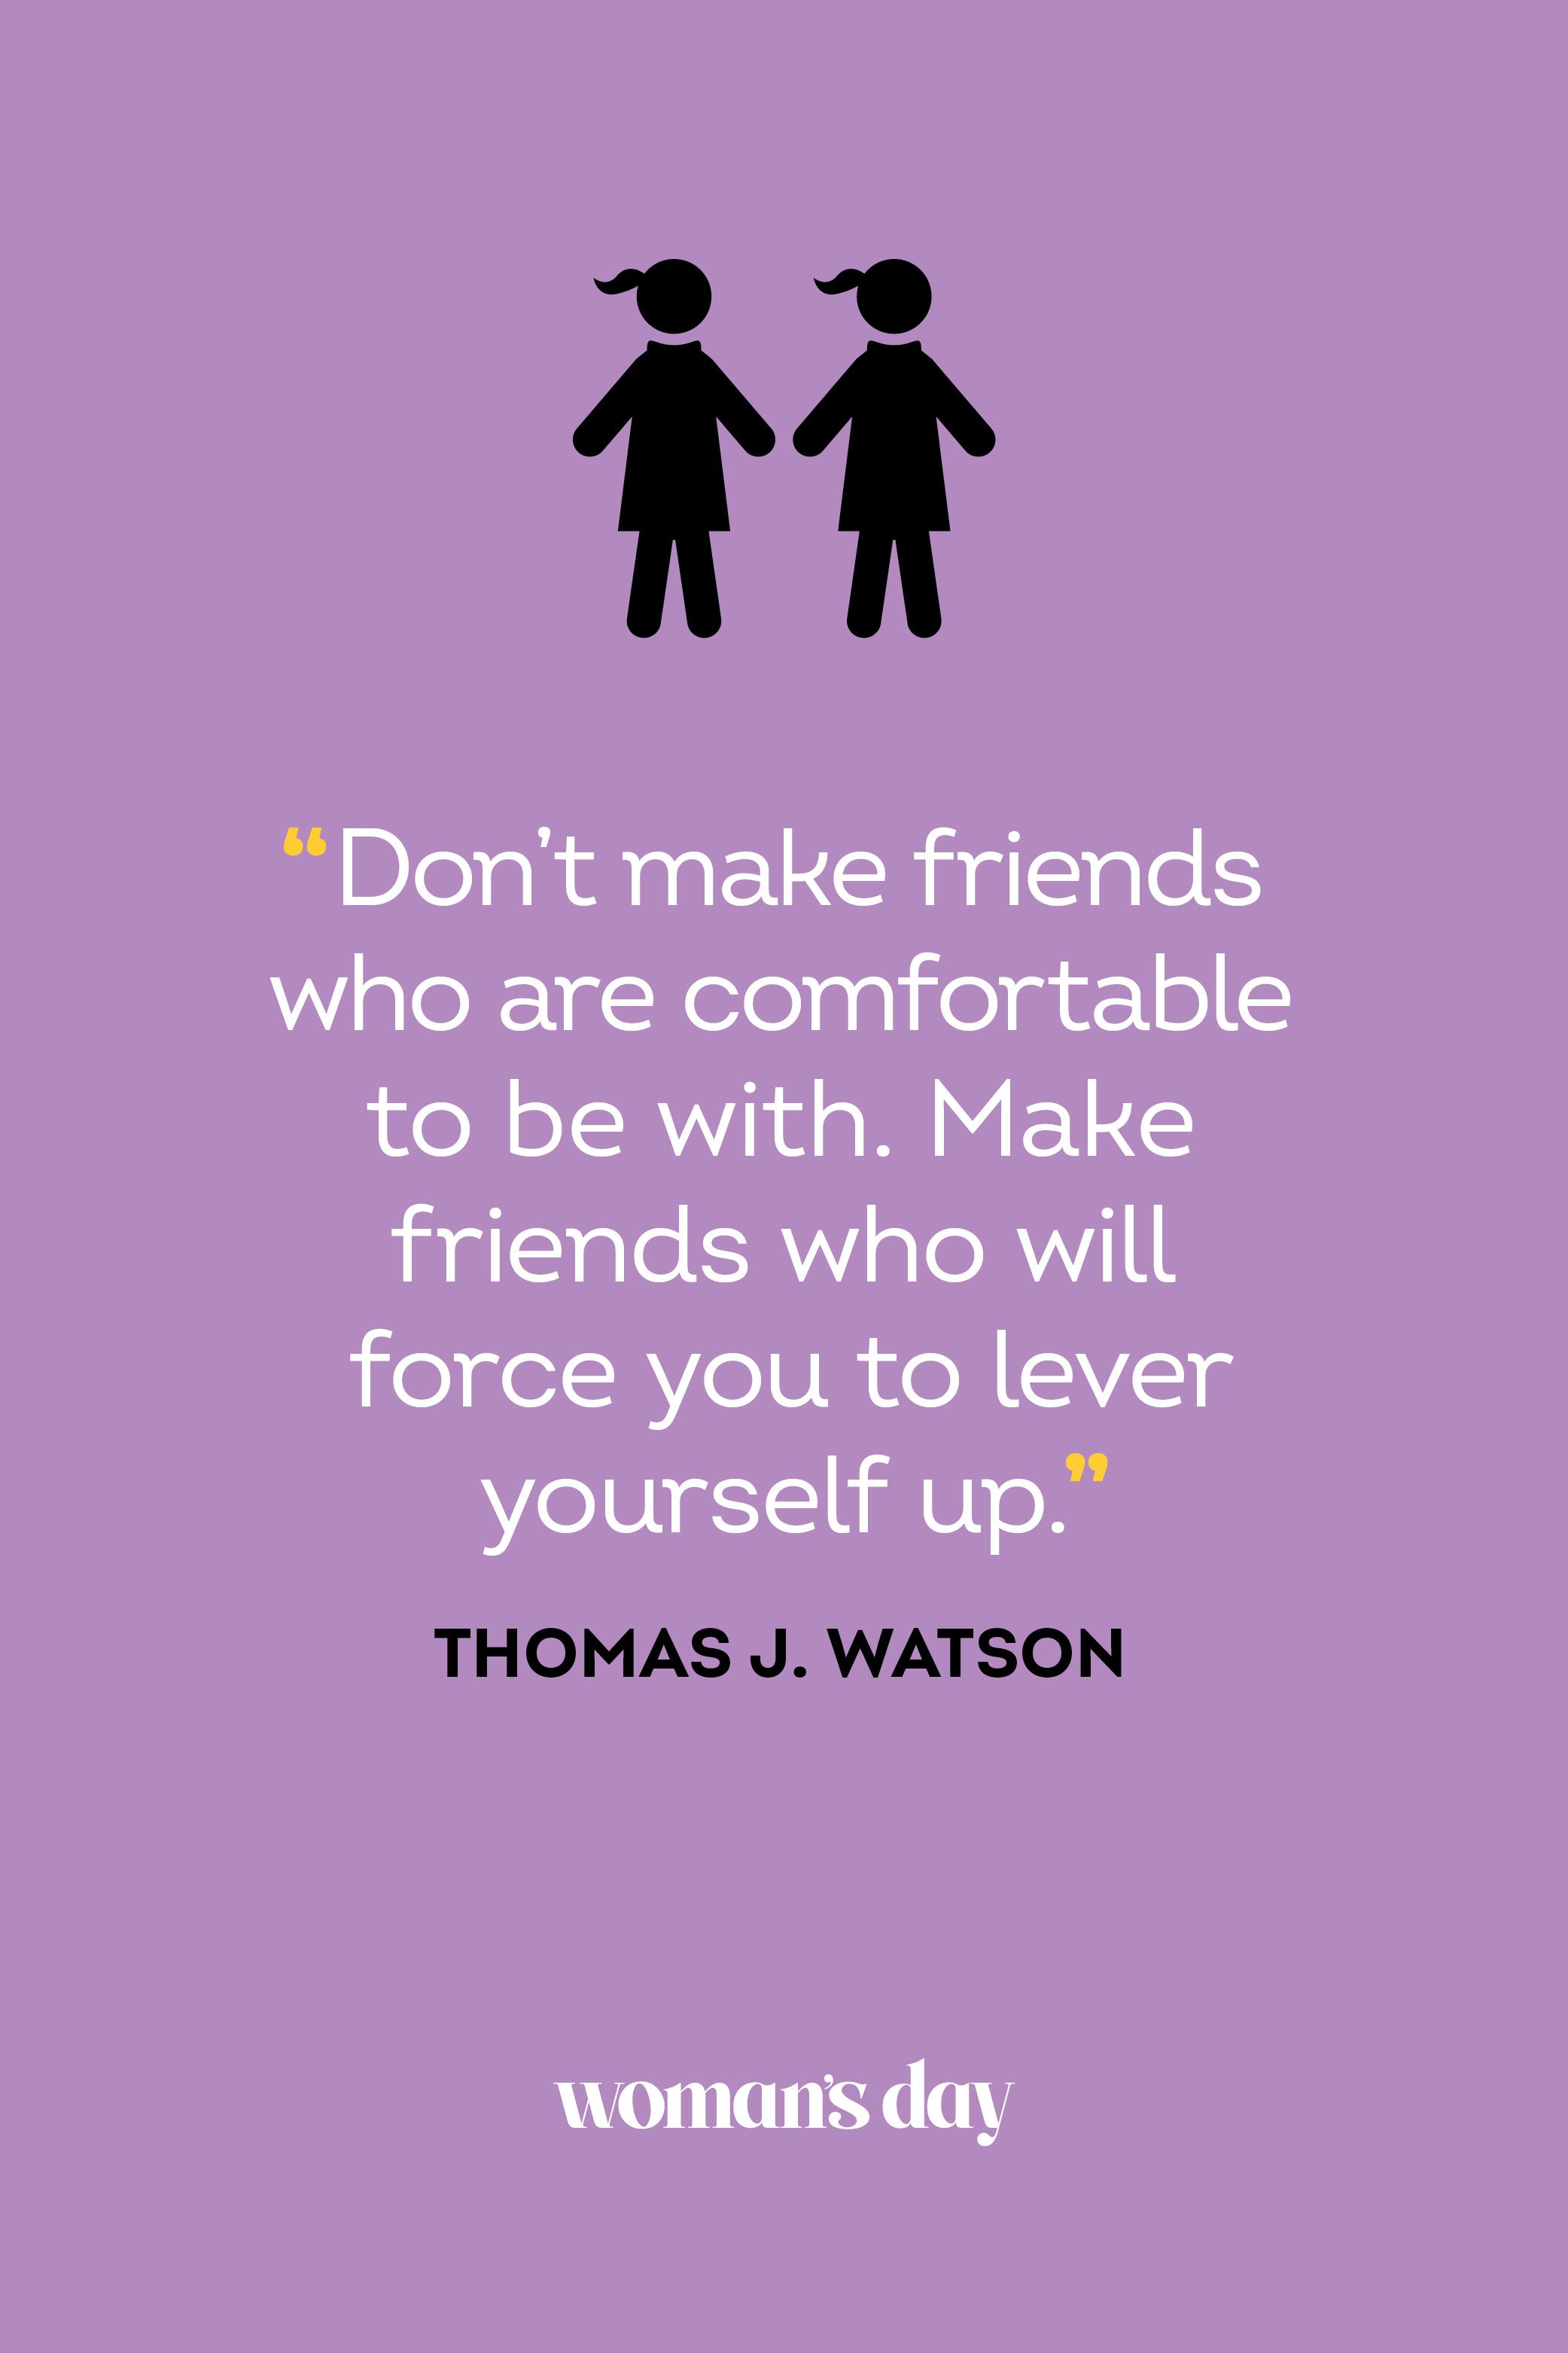 100 Short Best Friend Quotes - Friendship Quotes For Your Bff